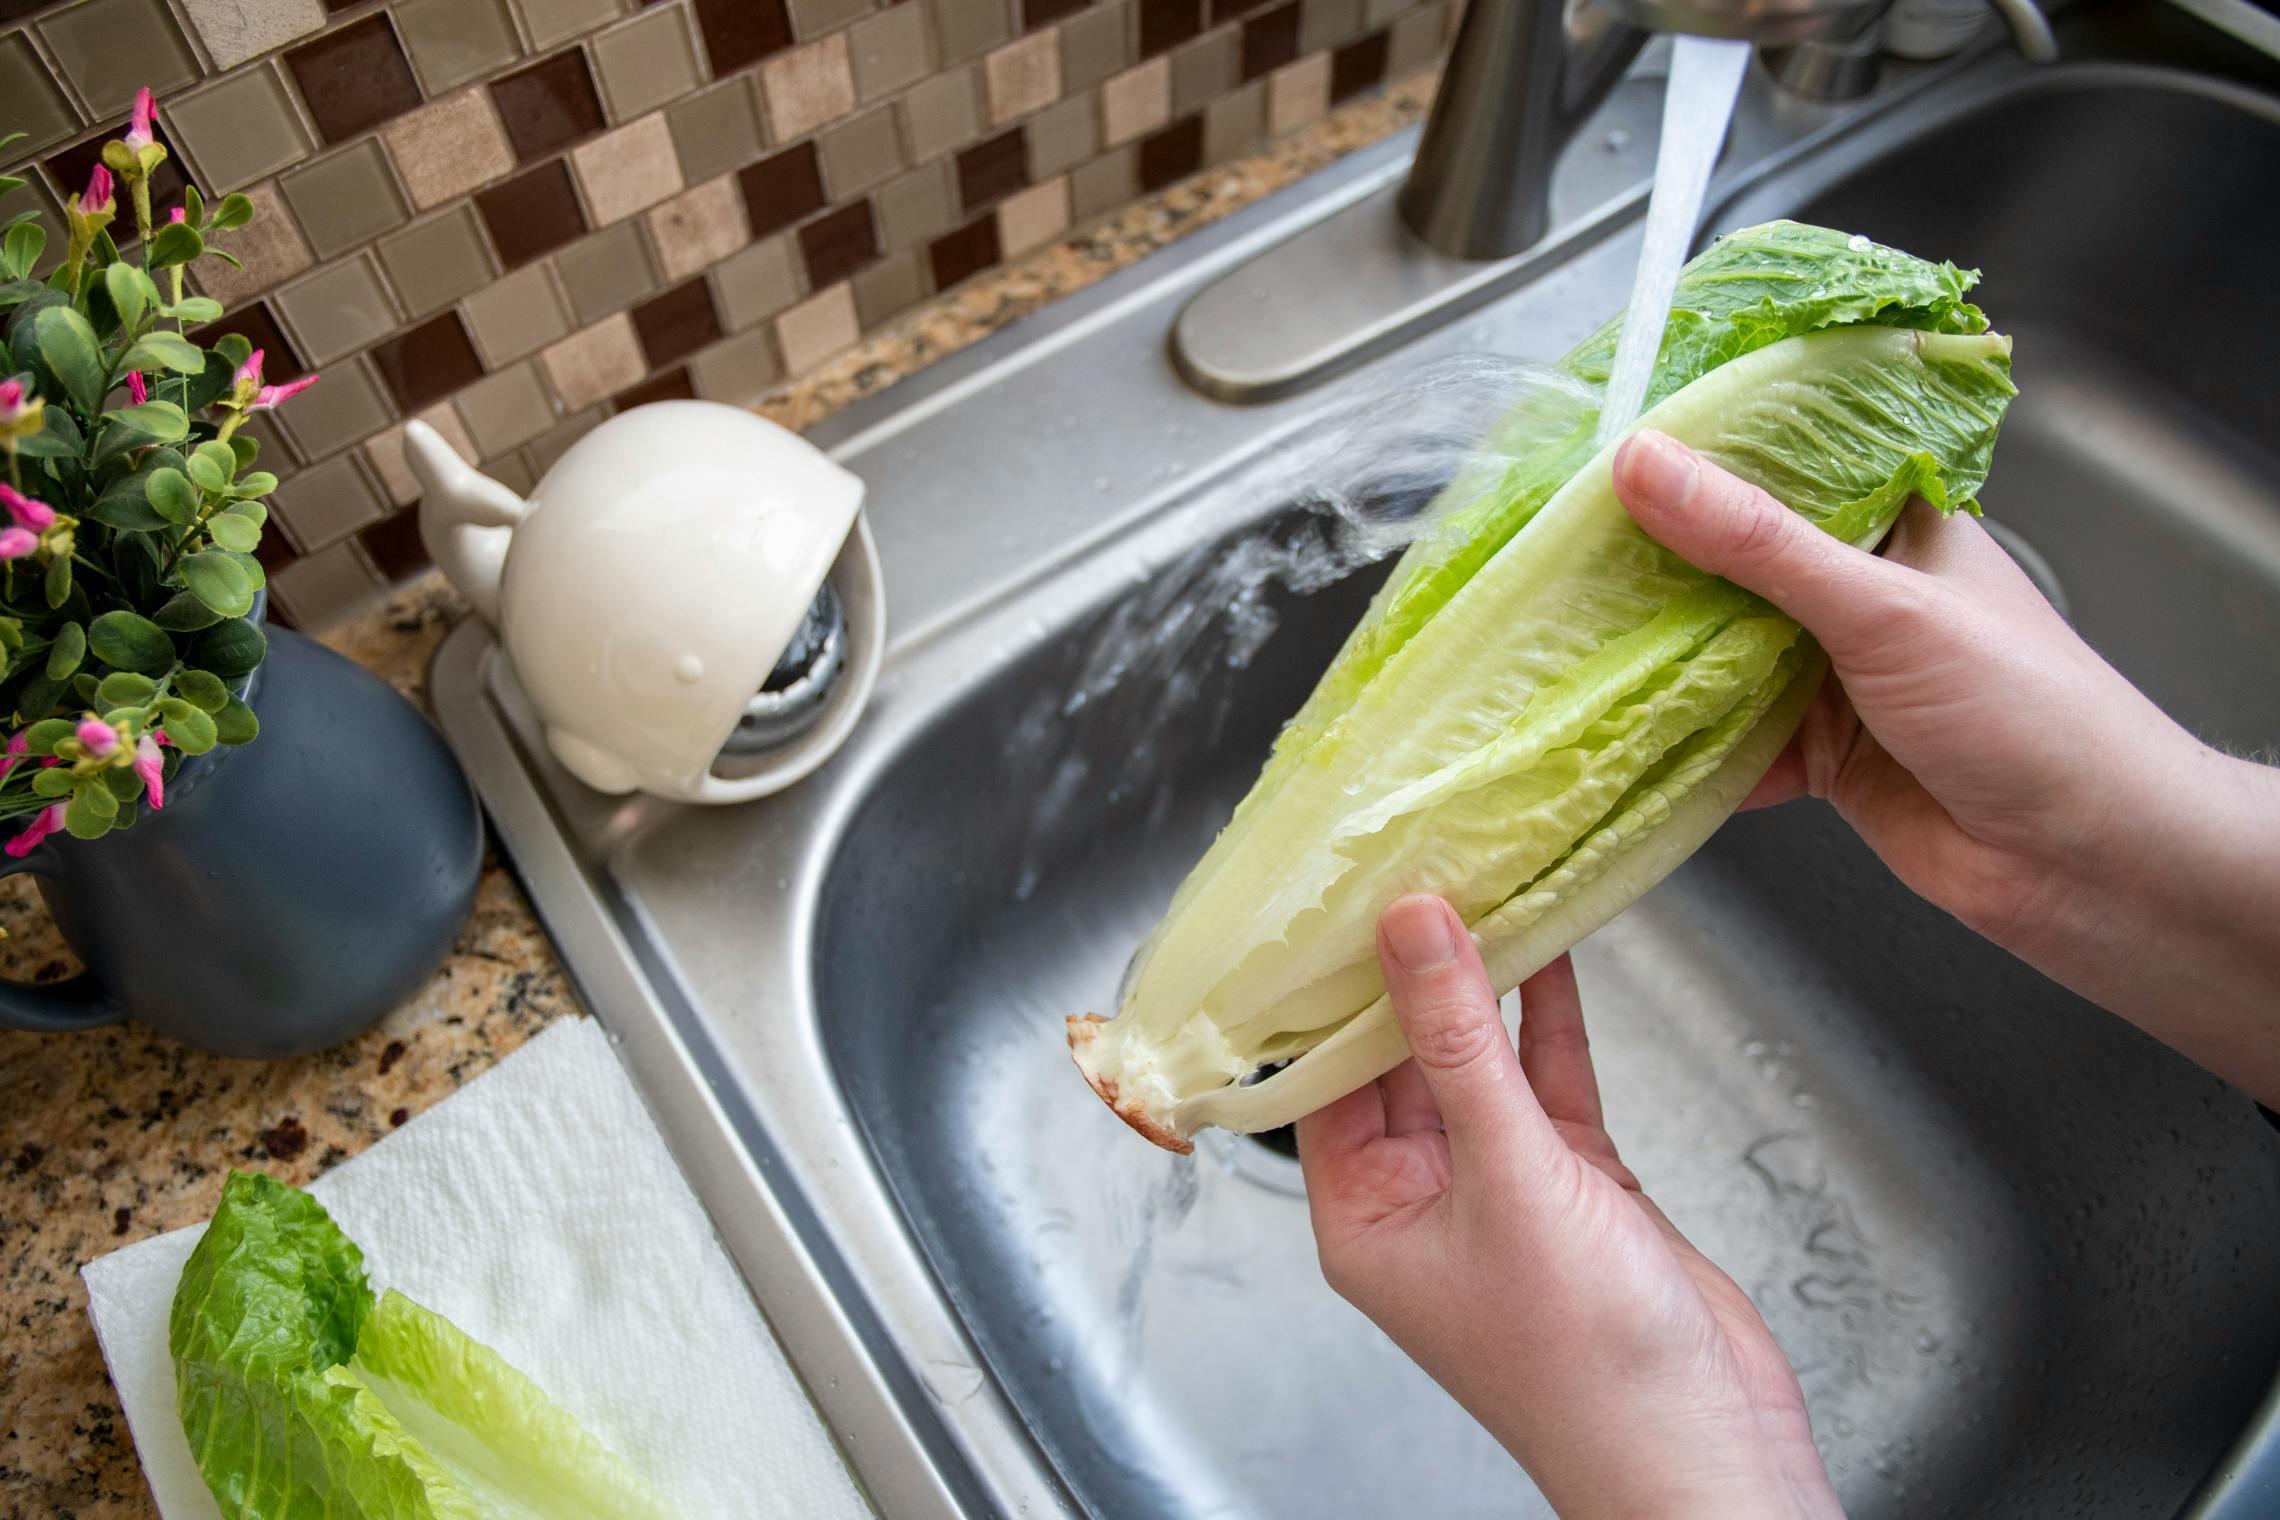 Romaine lettuce being washed over a kitchen sink.